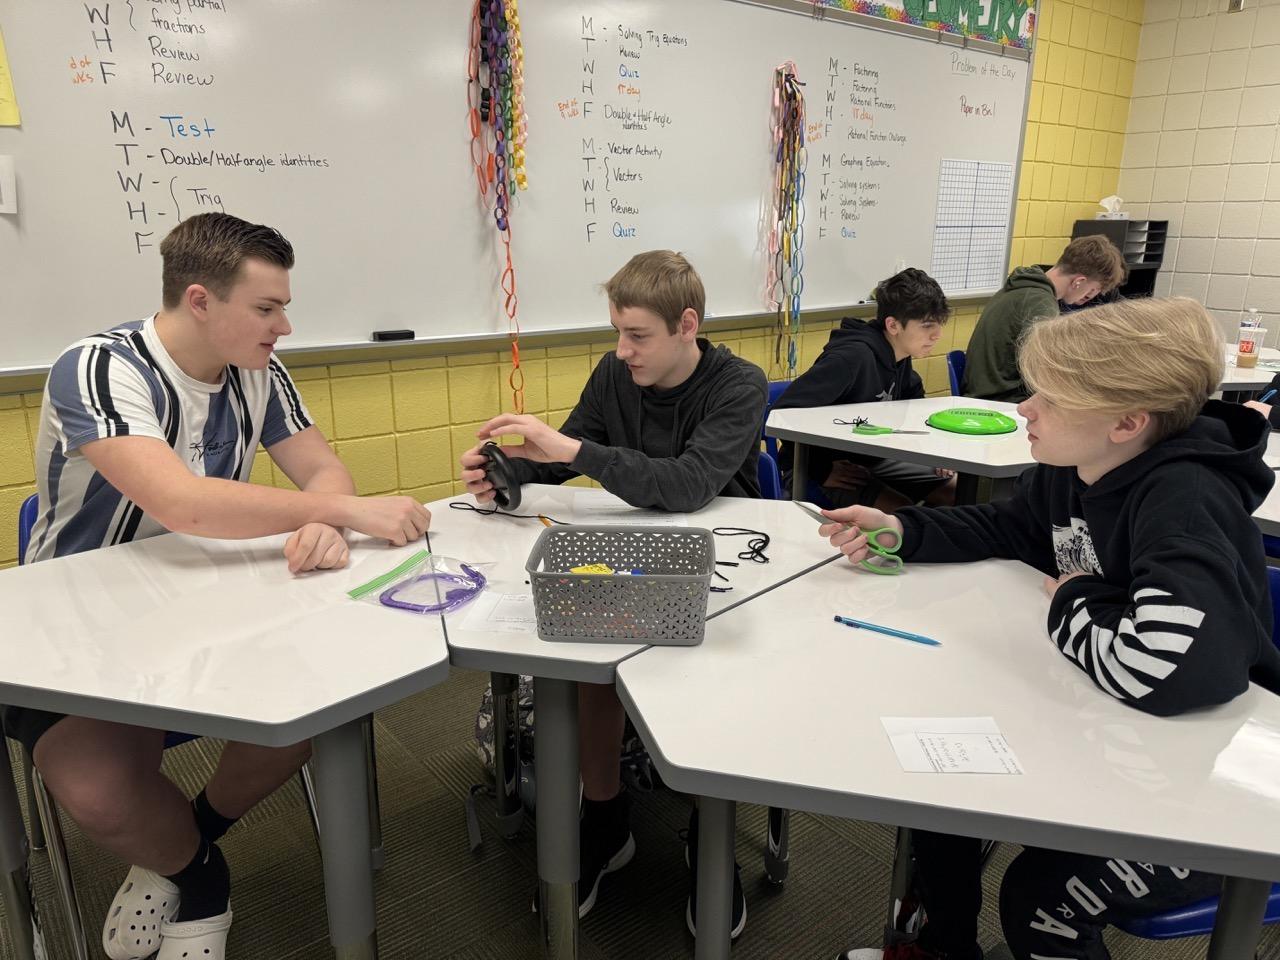 9th-graders Carson Weishorn, Collin Dransart and Jacob Binnion investigate the relationship between the circumference and diameter of a circle